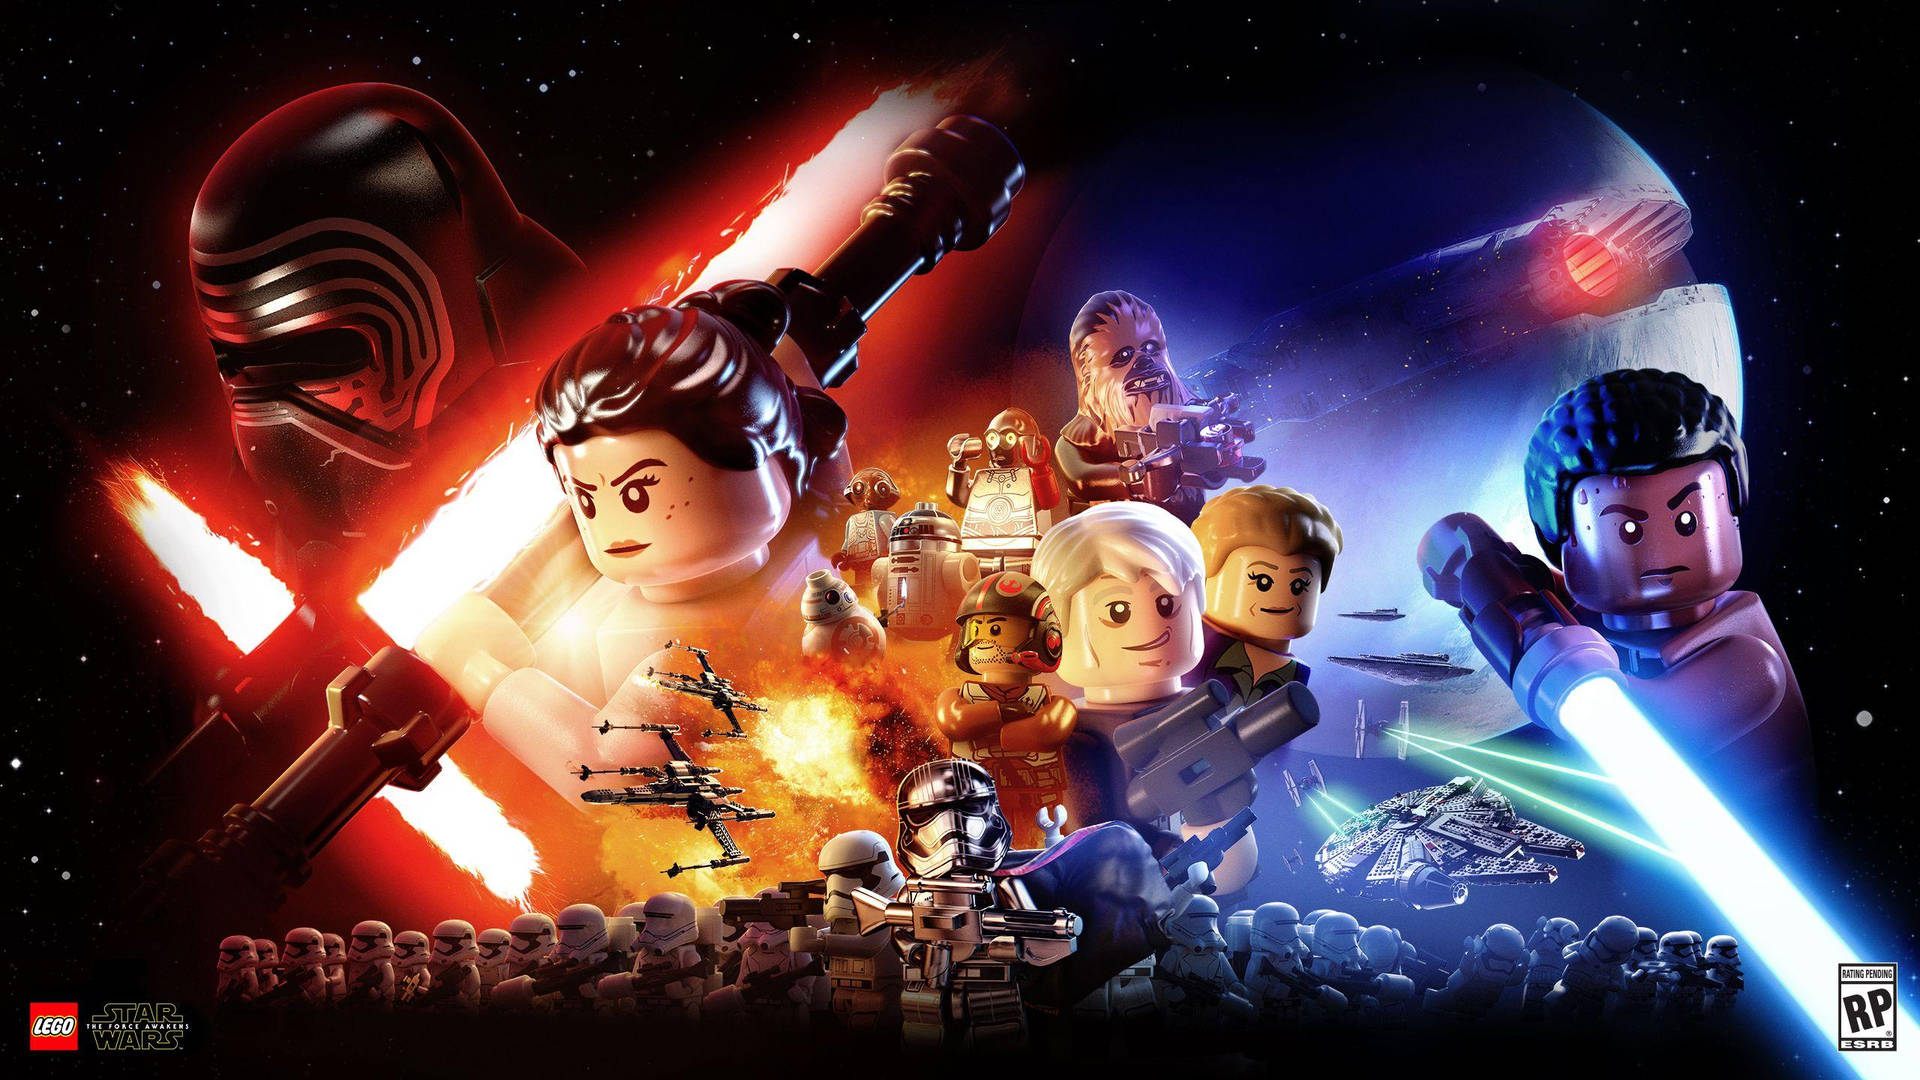 Lego Star Wars - An Adventure Swirling with Imagination Wallpaper